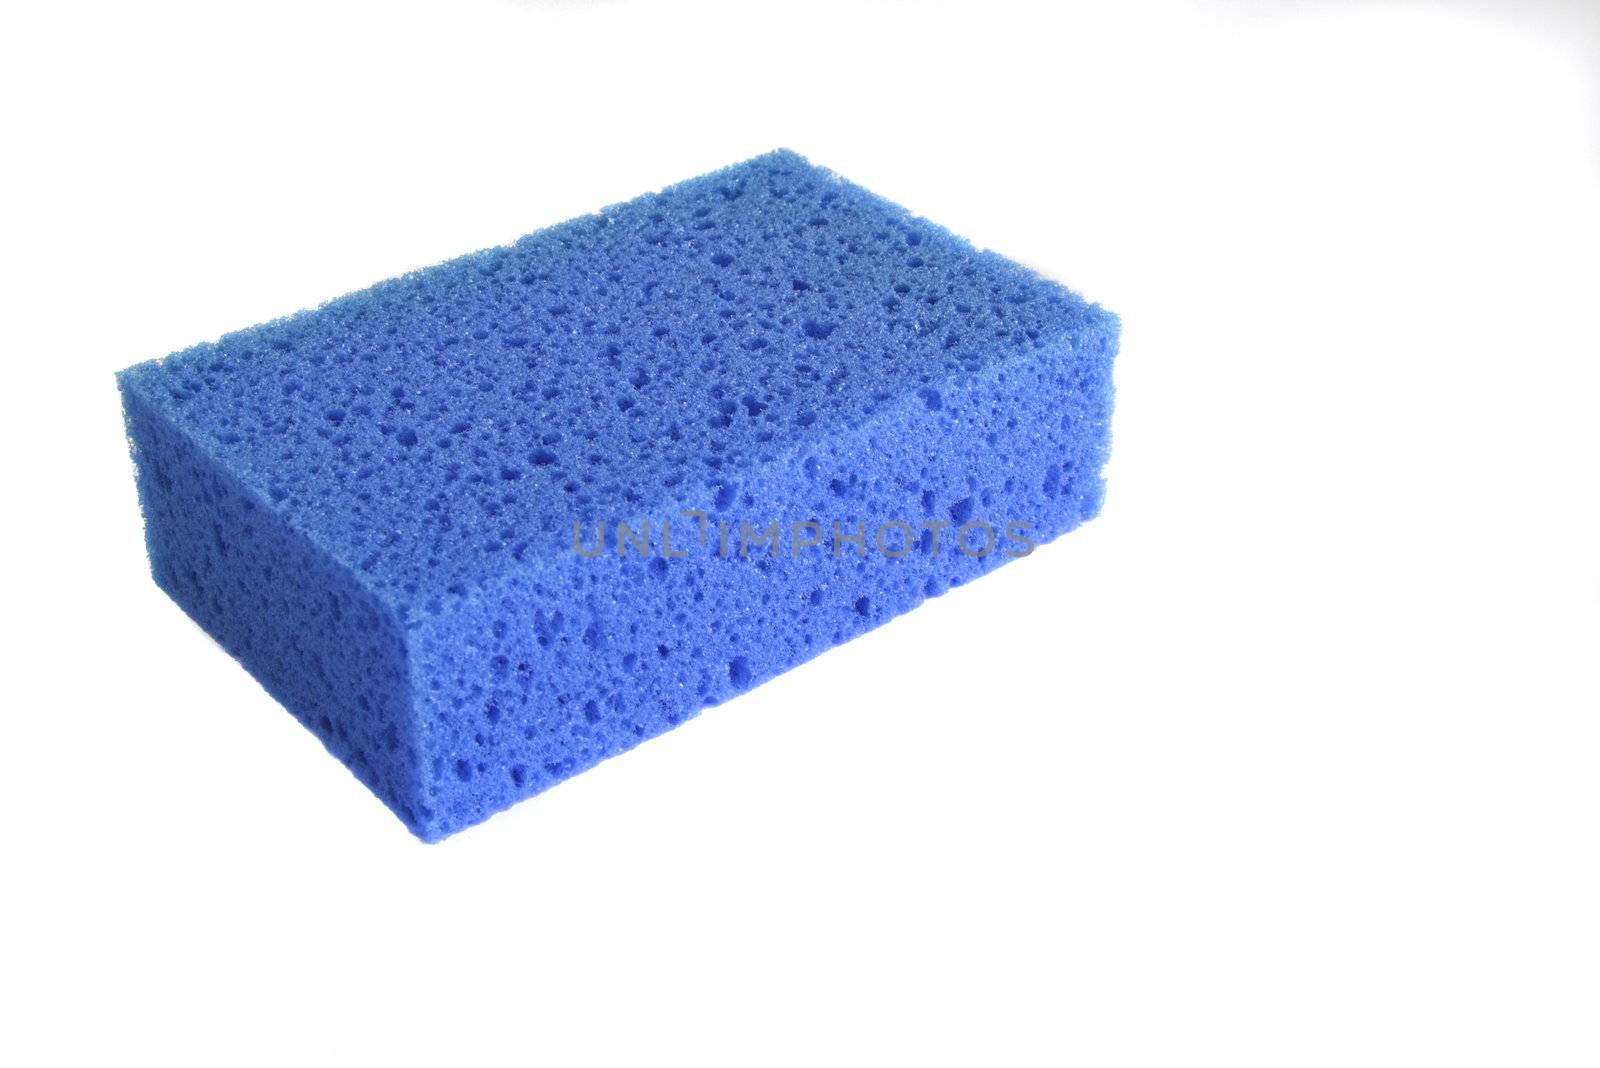 Blue sponge background isolated in a white background